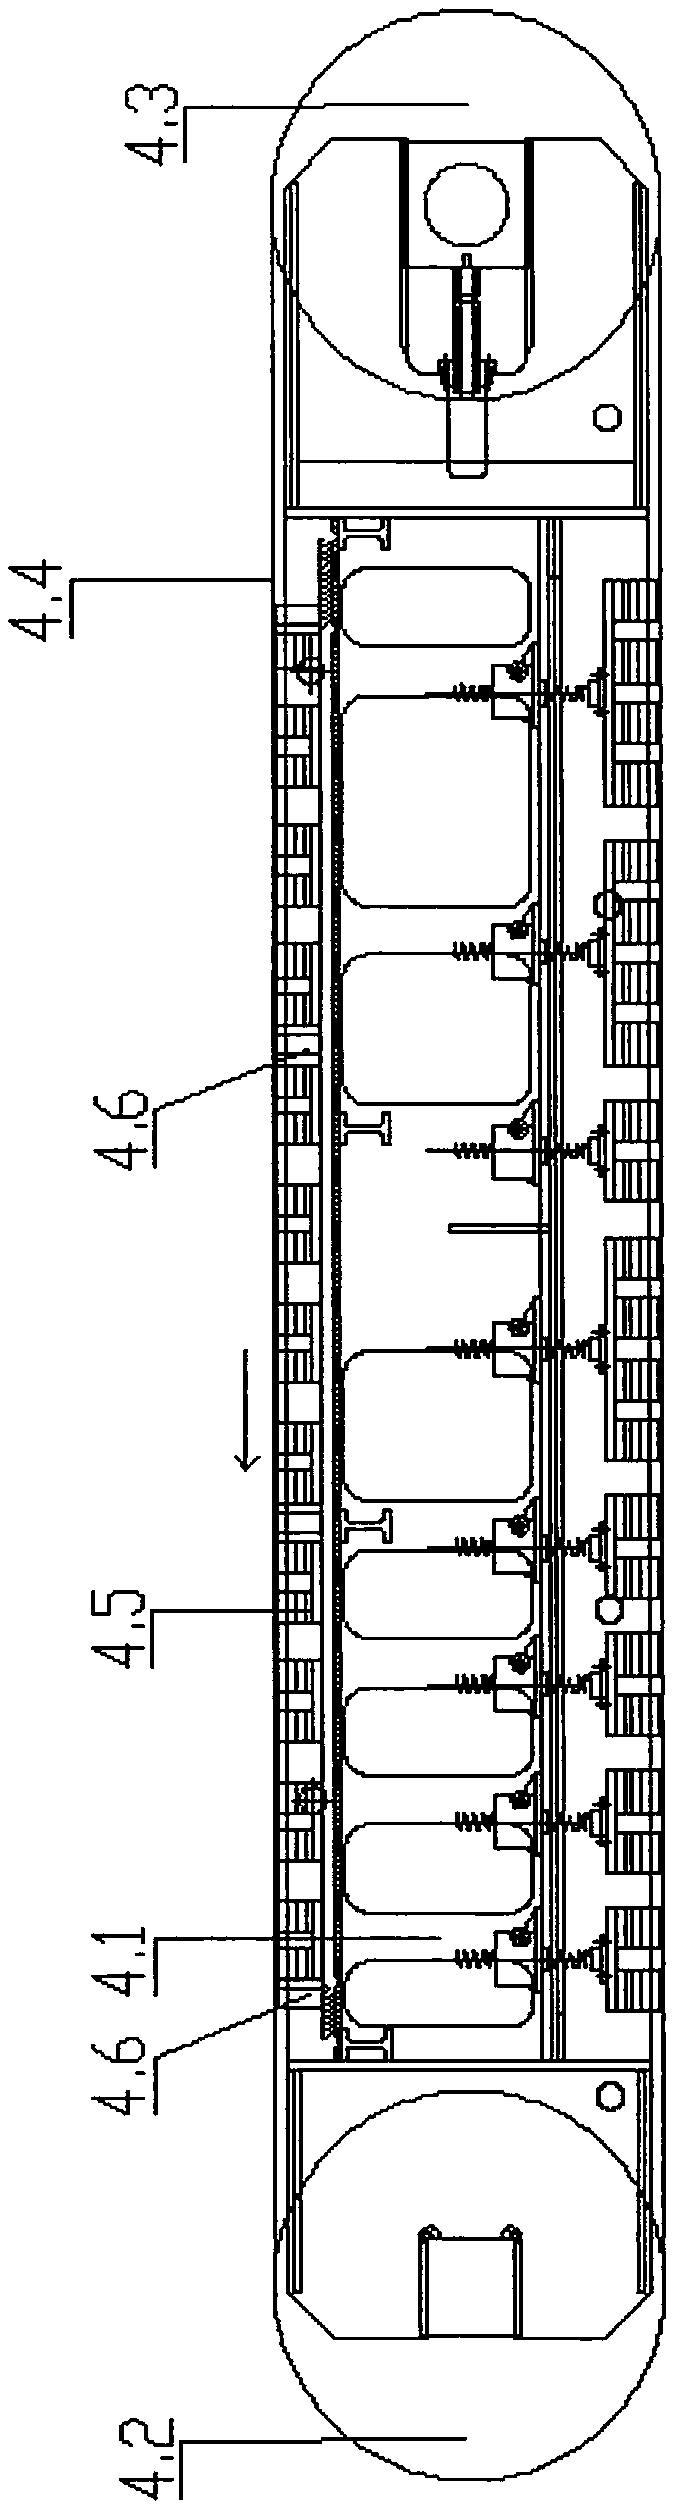 Multi-stage dry magnetic separator